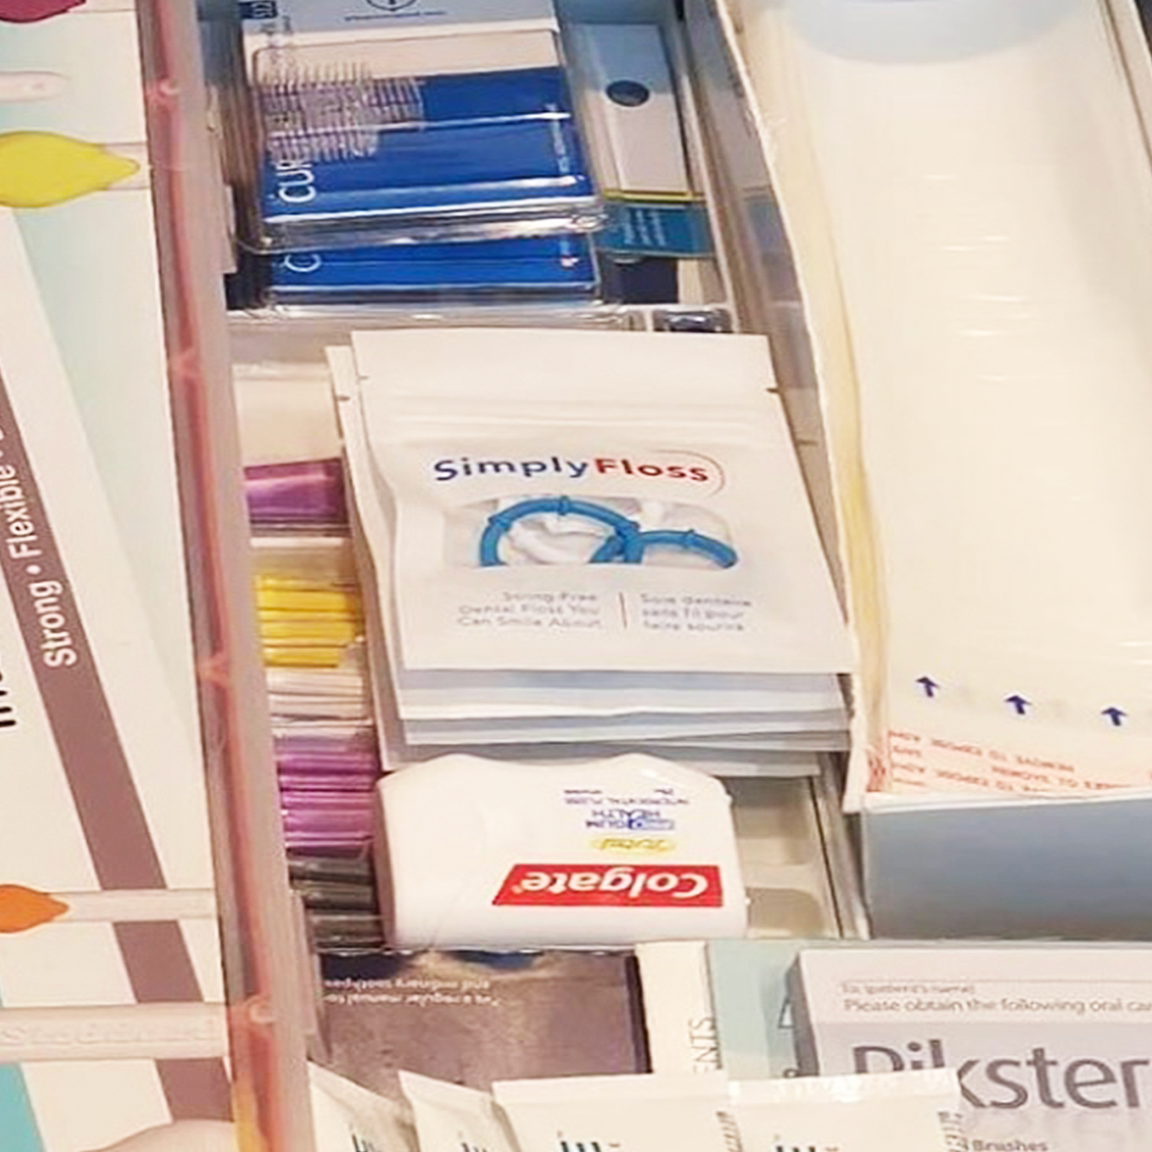 Floss'N Go Packs - A Floss Alternative For Your Dental Patients